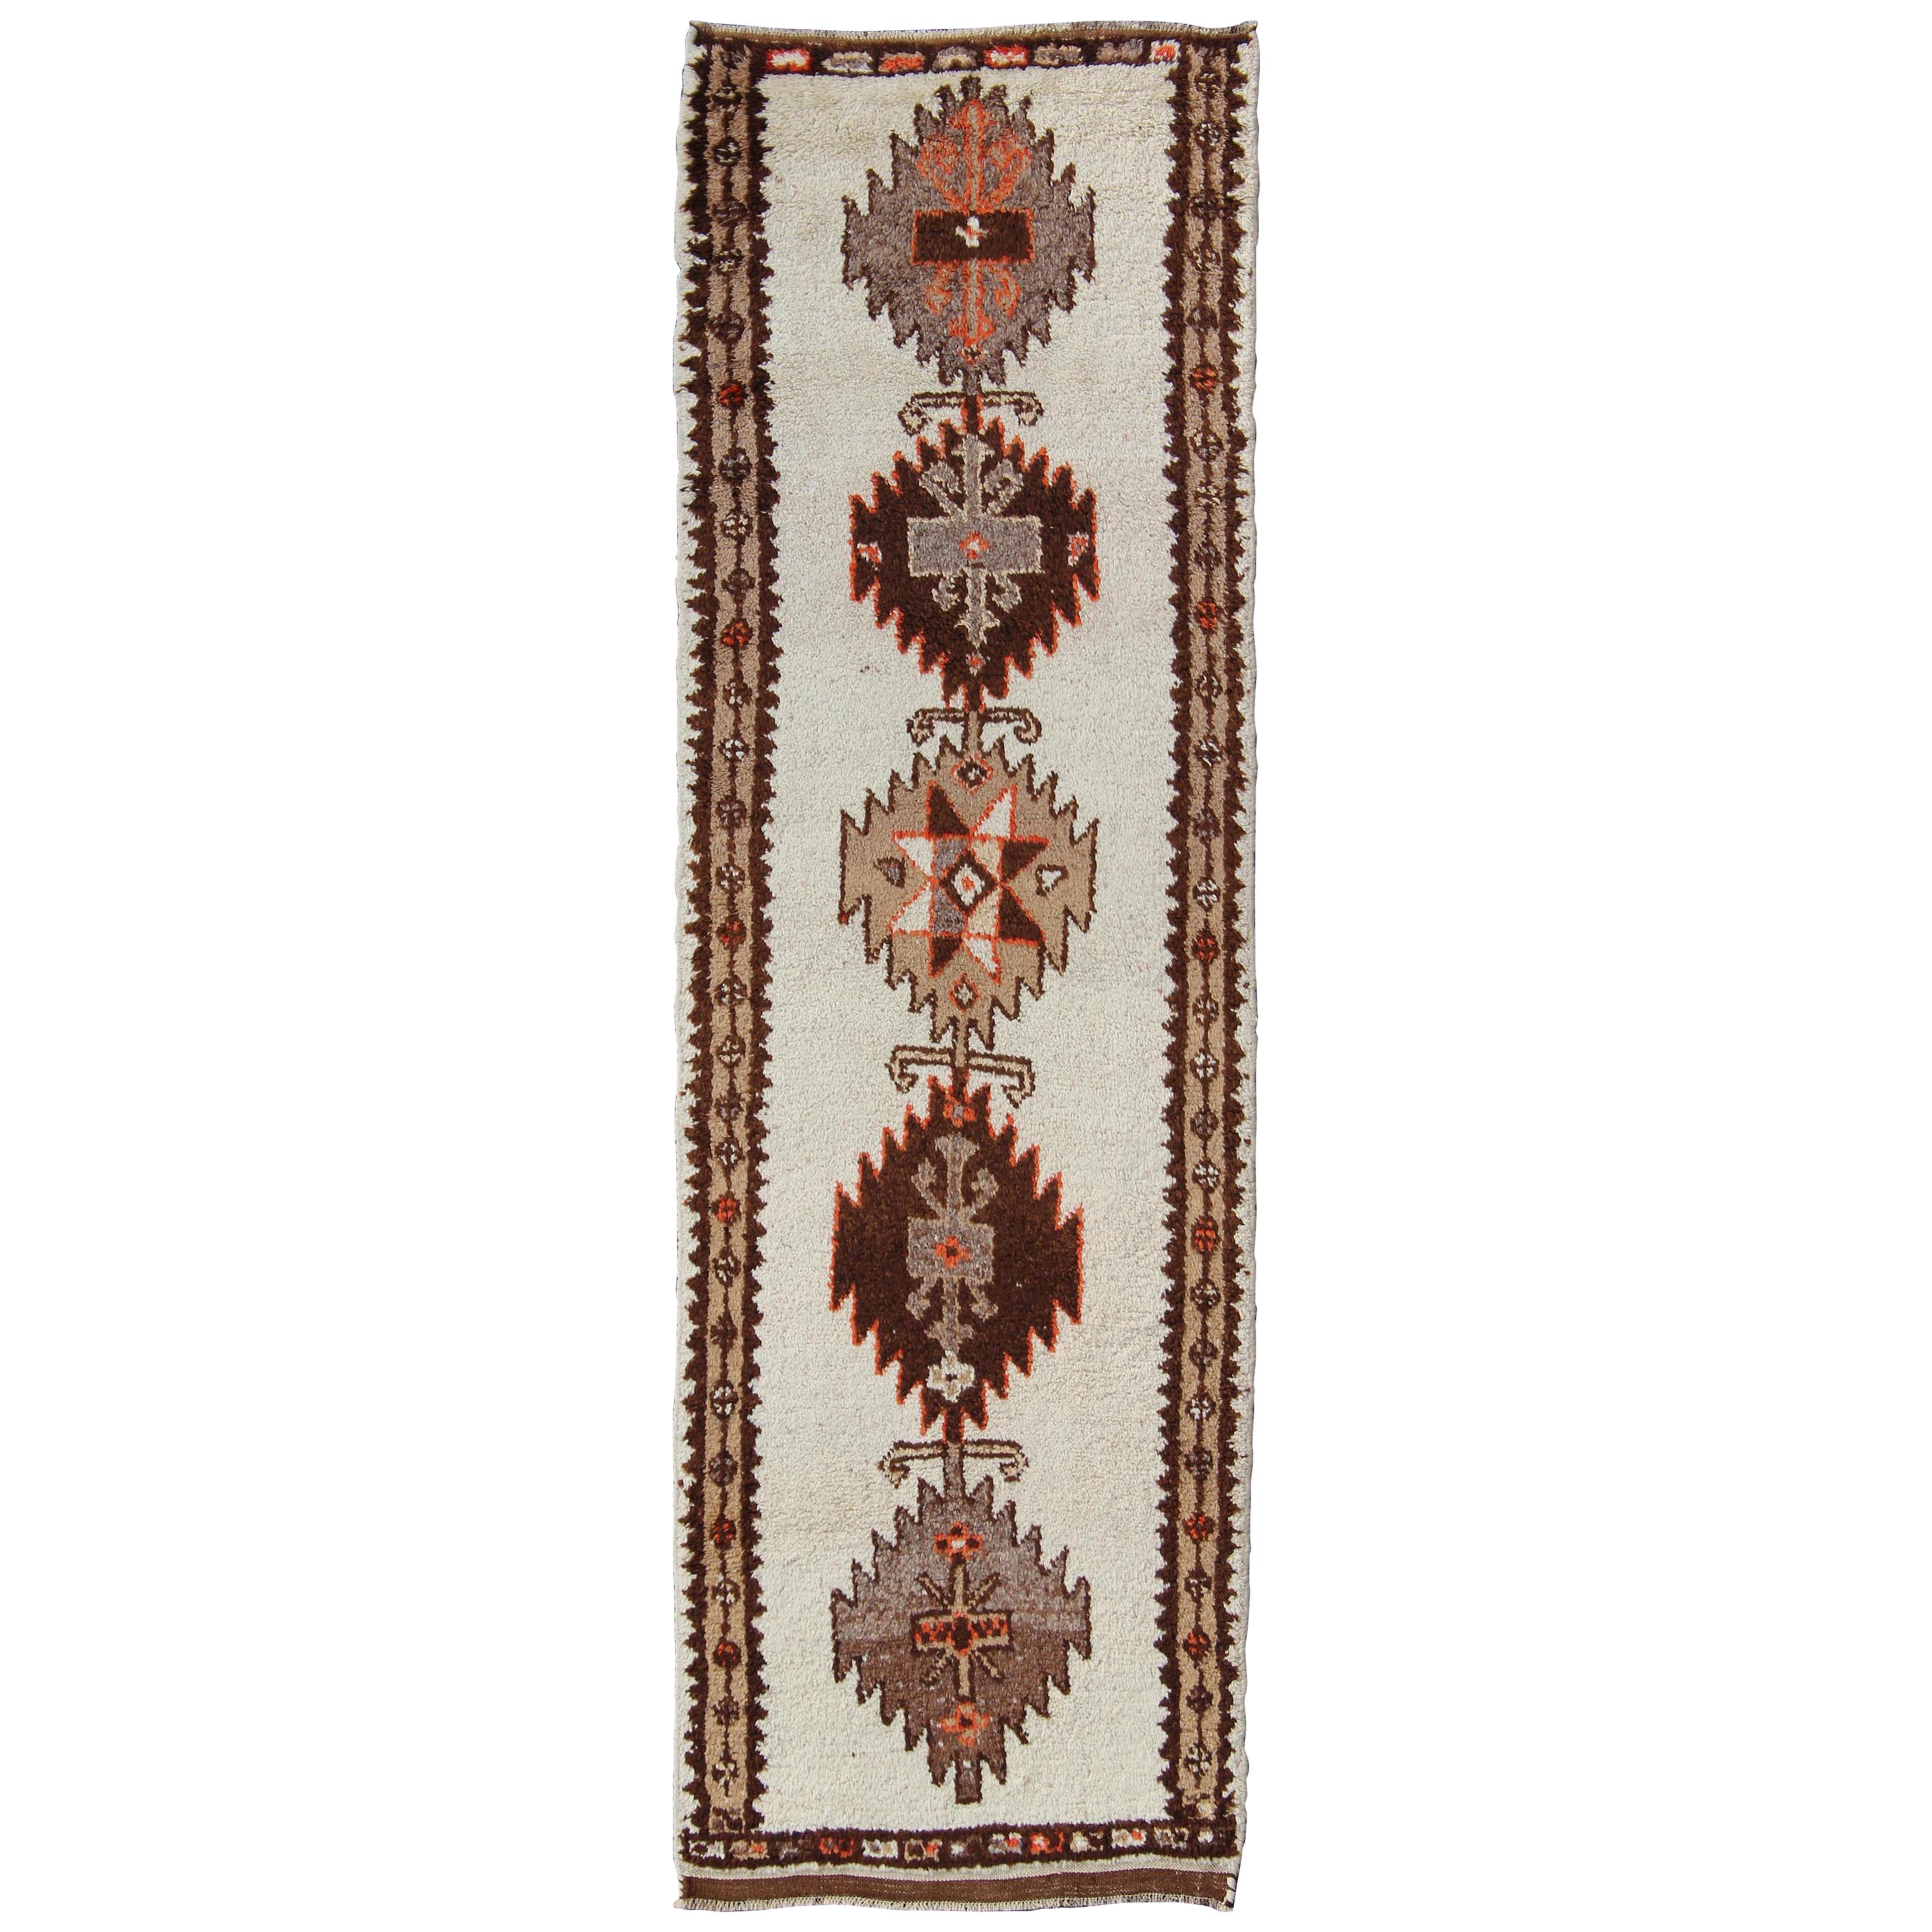 Vintage Turkish Tulu Gallery Rug in Shades of Brown and Gray with Medallions